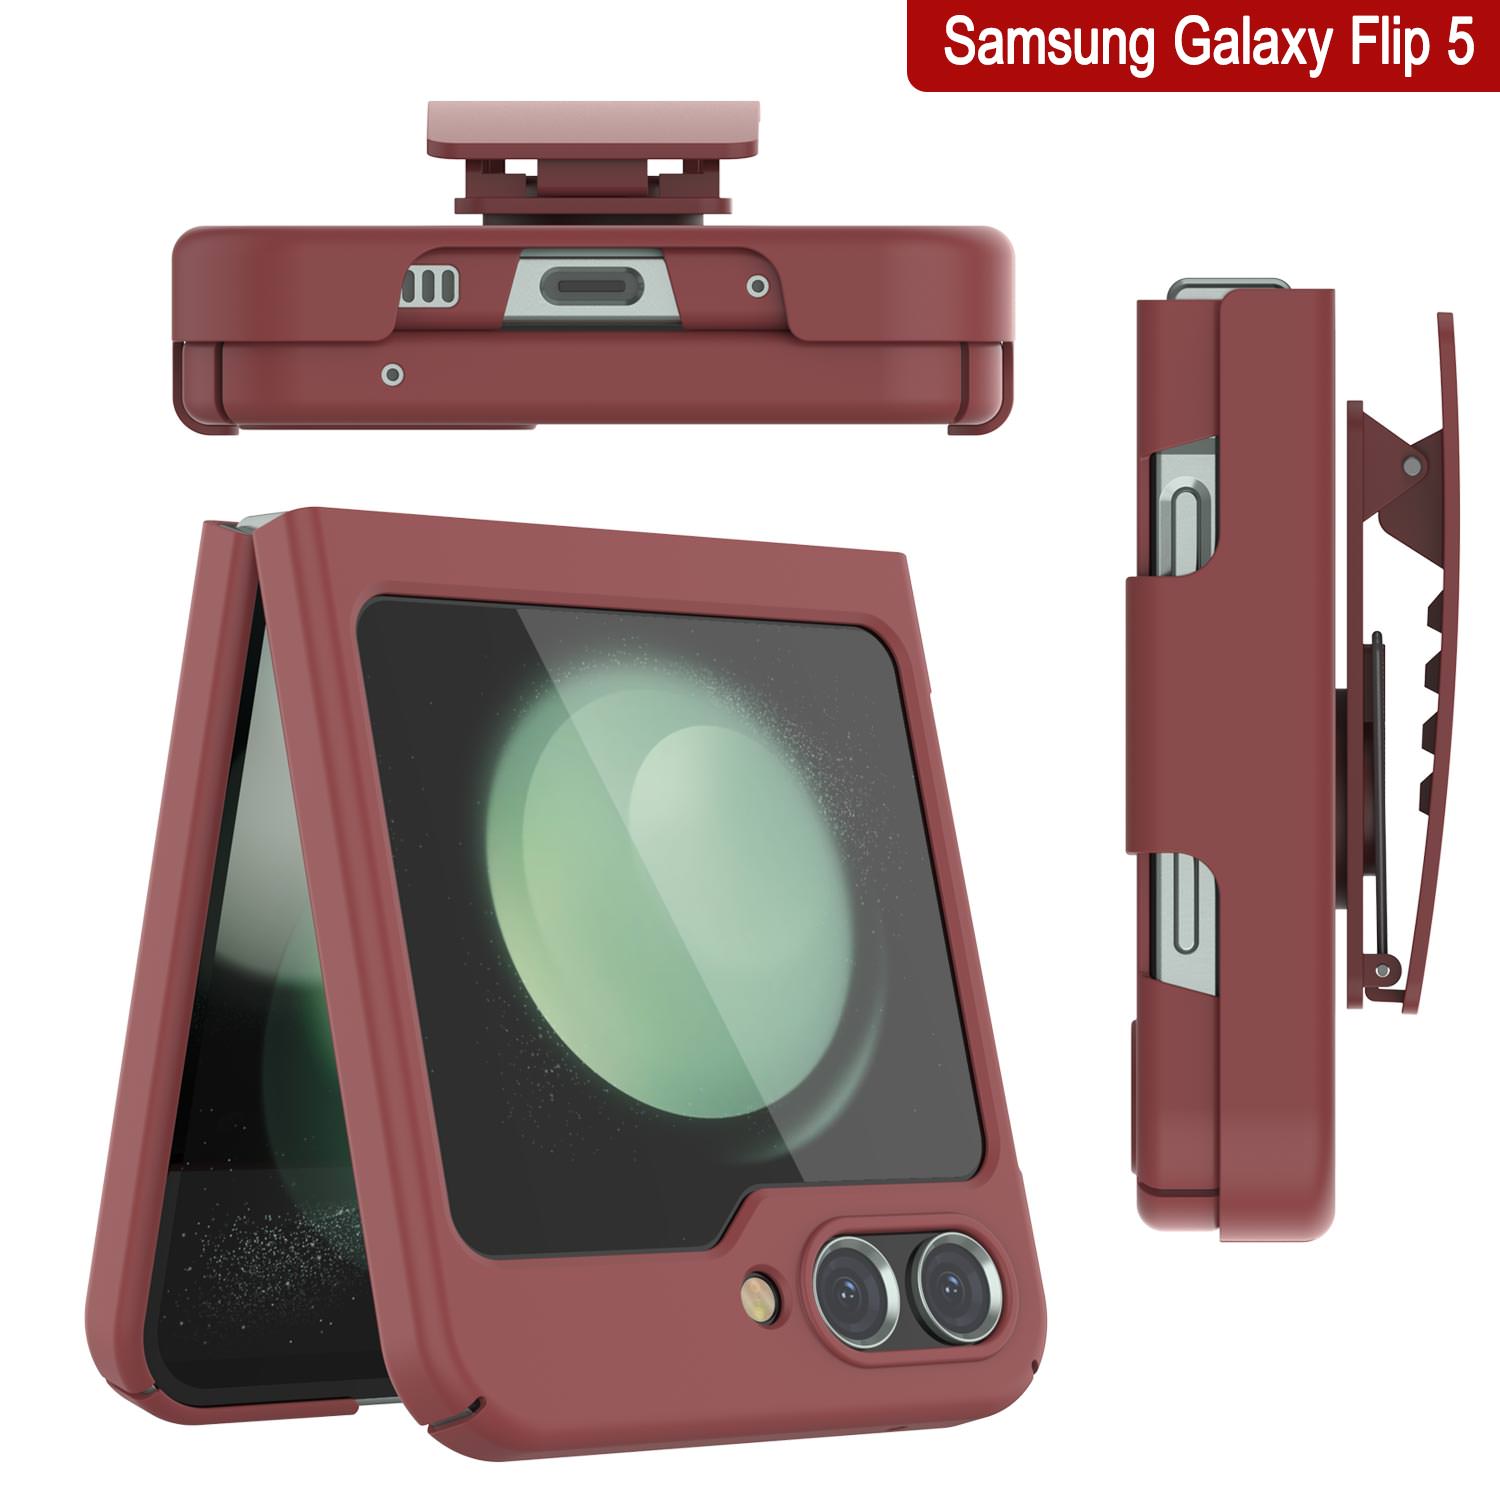 Galaxy Z Flip5 Case With Tempered Glass Screen Protector, Holster Belt Clip & Built-In Kickstand [Red]